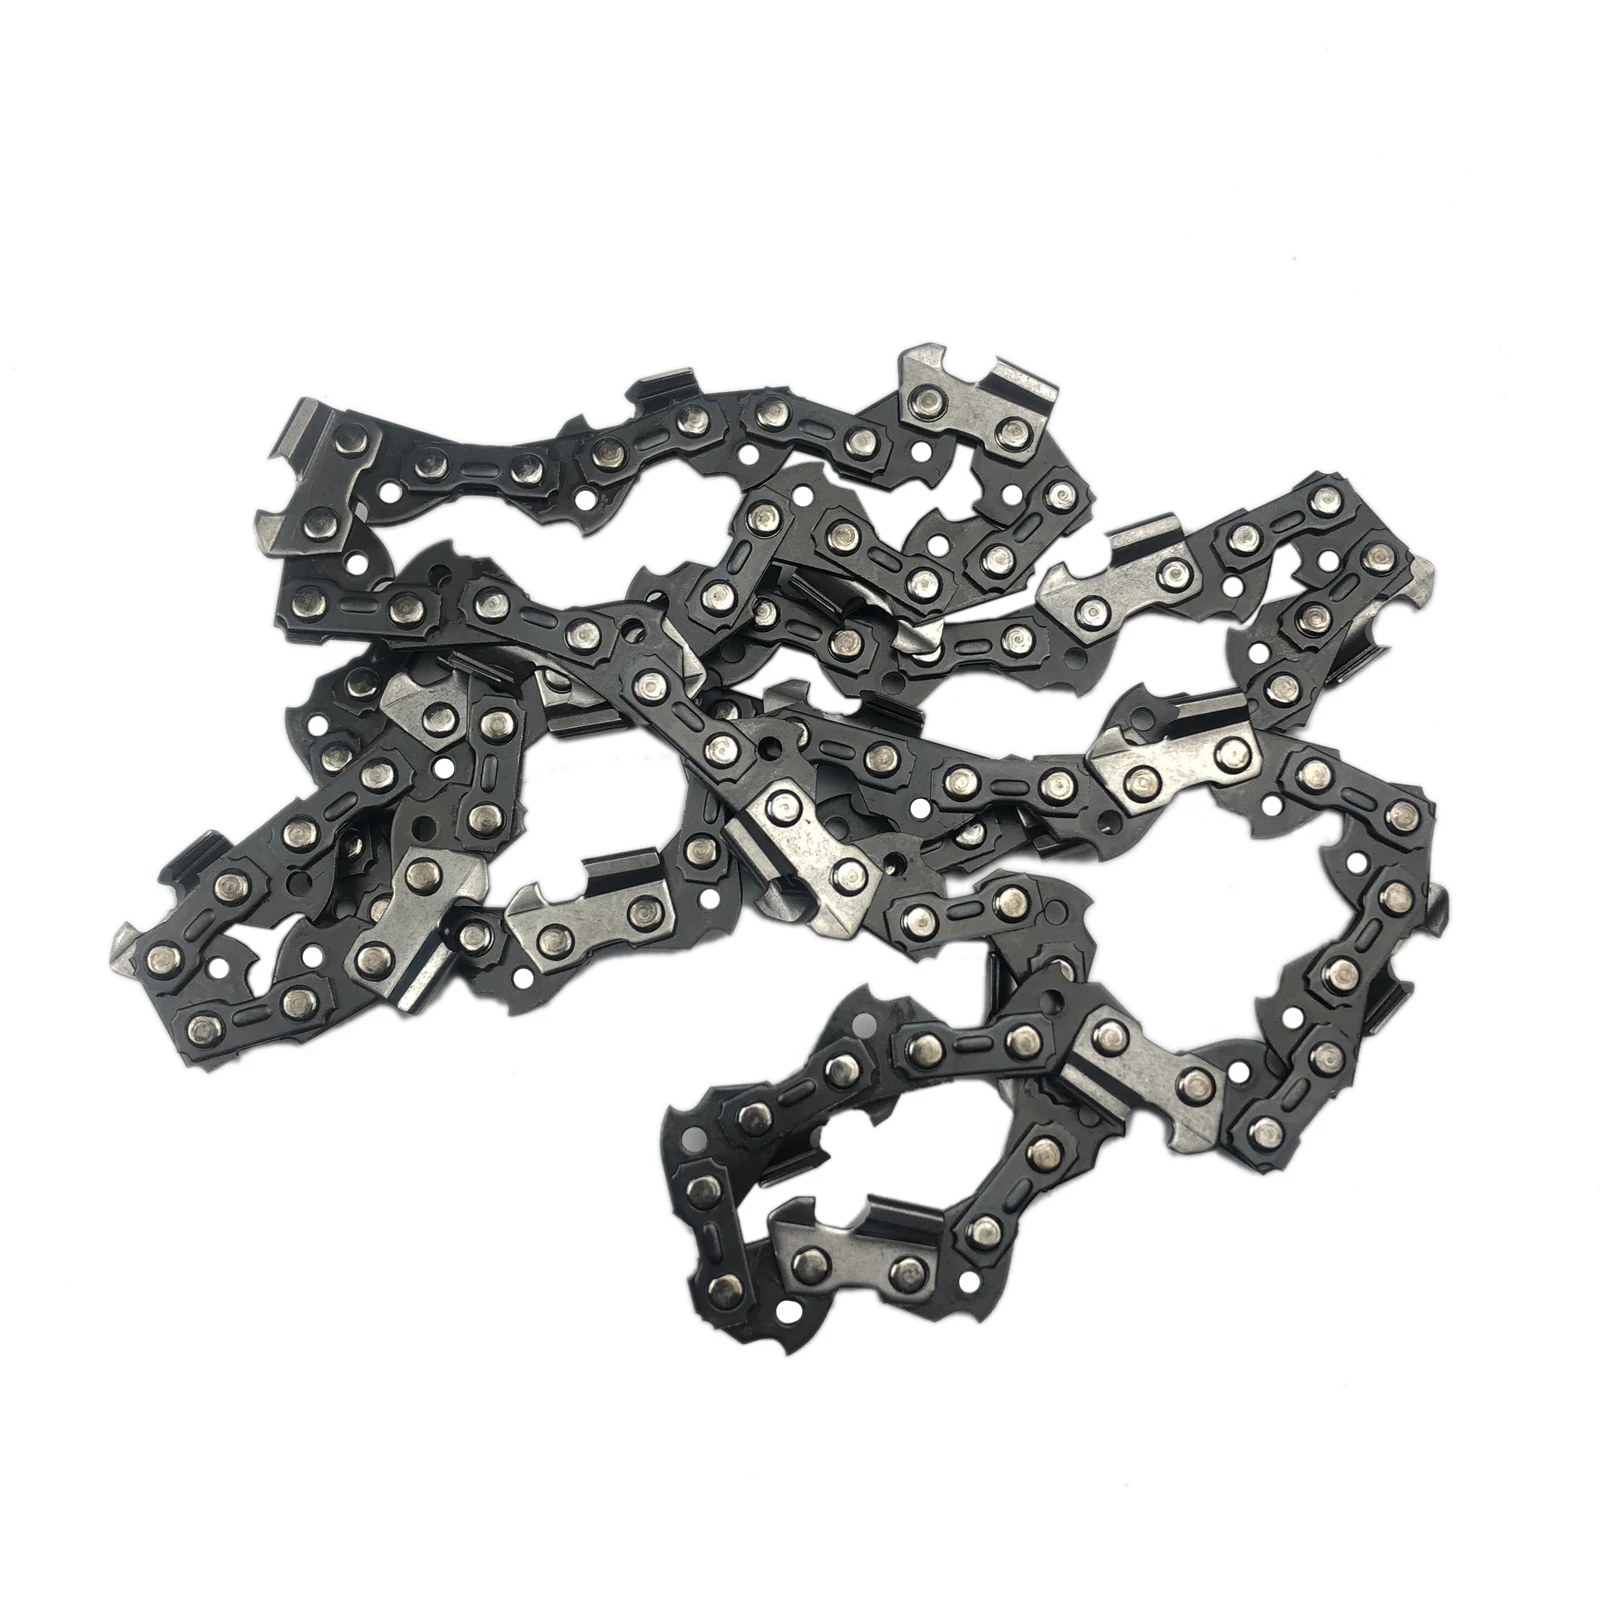 14&#39;&#39; Chainsaw Chain 3/8 LP 50DL For STIHL MS170 MS180 MS181 MS190 MS191T MS192T MS200 MS200T MS210 MS211 MS230